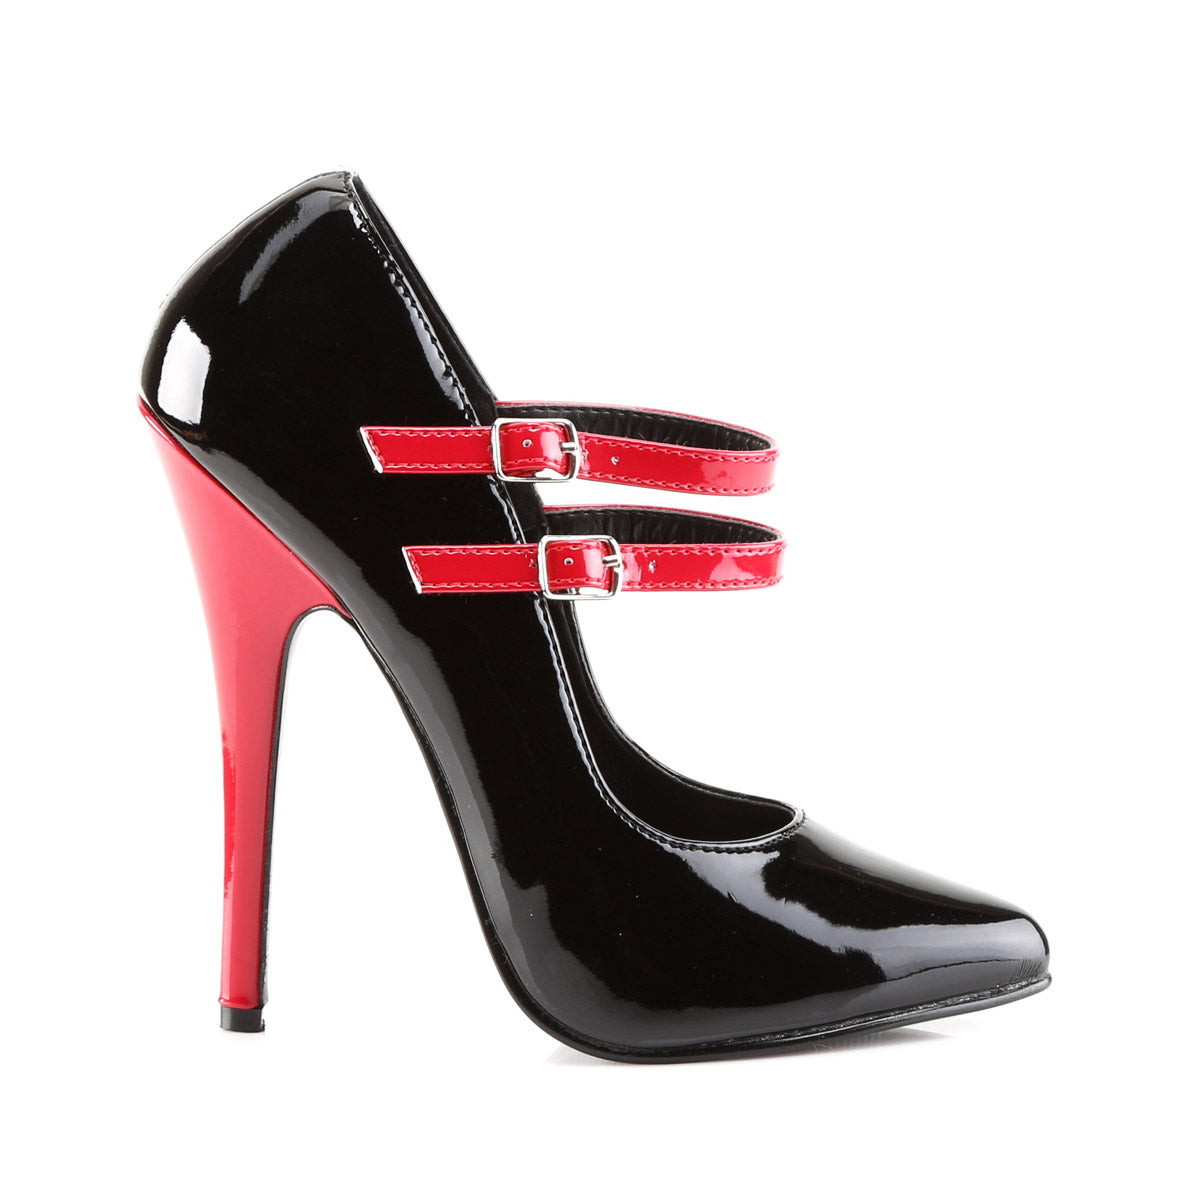 Sexy Two Tone Double Strap Mary Jane Stiletto Pumps High Heels Shoes Pleaser Devious DOMINA/442